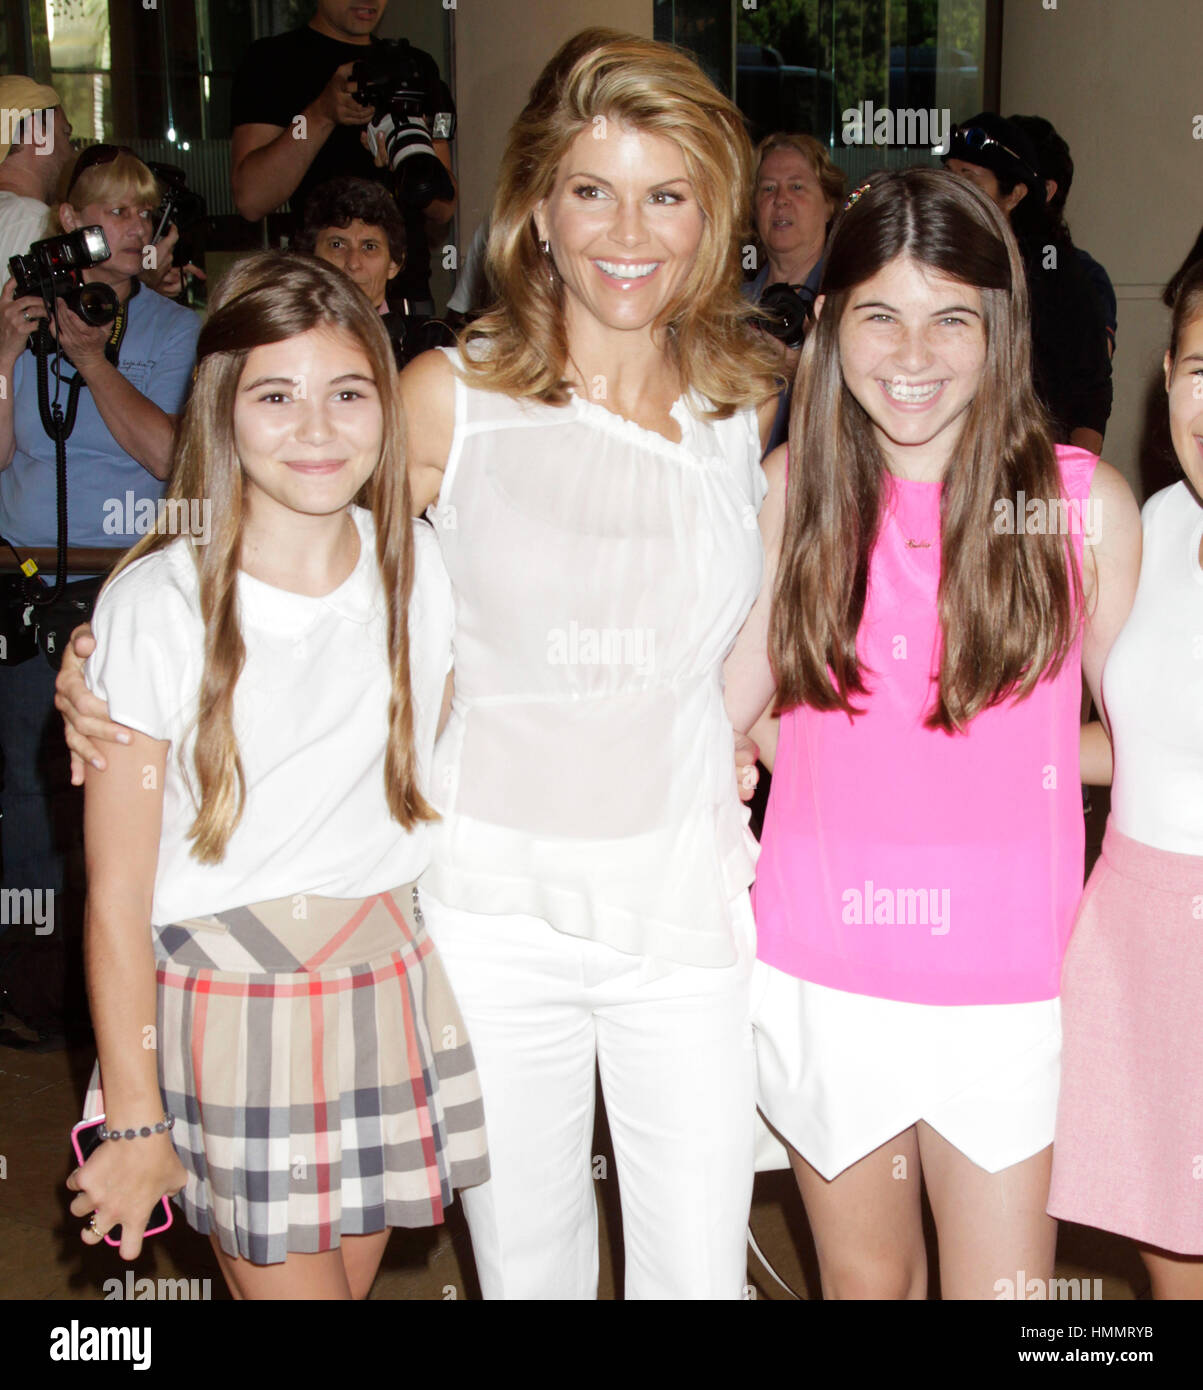 Lori Loughlin, center, with her daughters, Olivia Jade Giannulli, left, and Isabella Rose Giannulli arrive for the Hallmark Channel and Hallmark Movie Channel presentation at the 2013 Summer TV Critics Press Tour on July 24, 2013 in Beverly Hills, California. Photo by Francis Specker Stock Photo